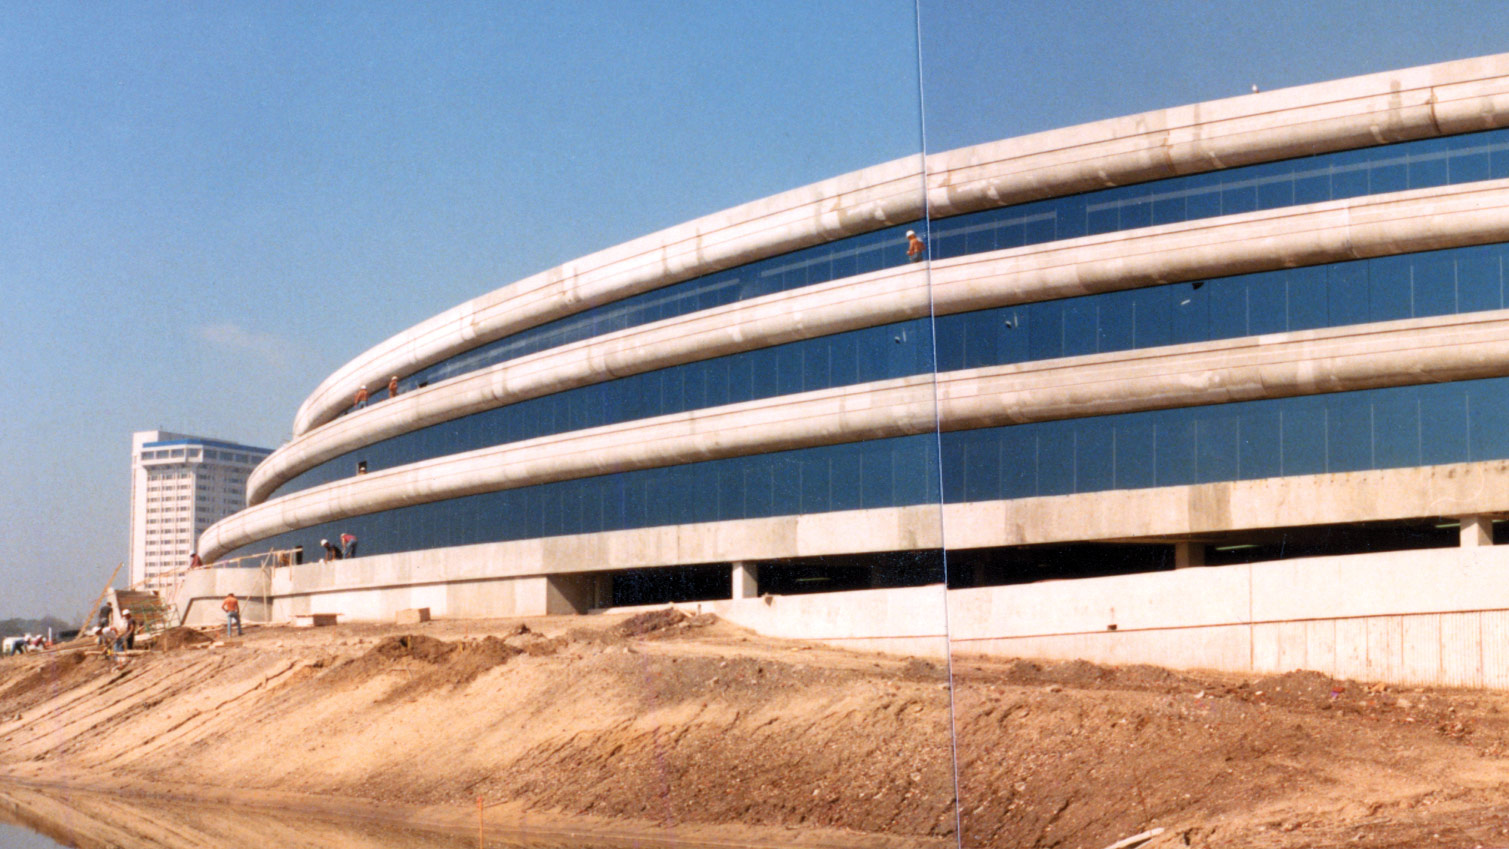 The Haskell building under construction.